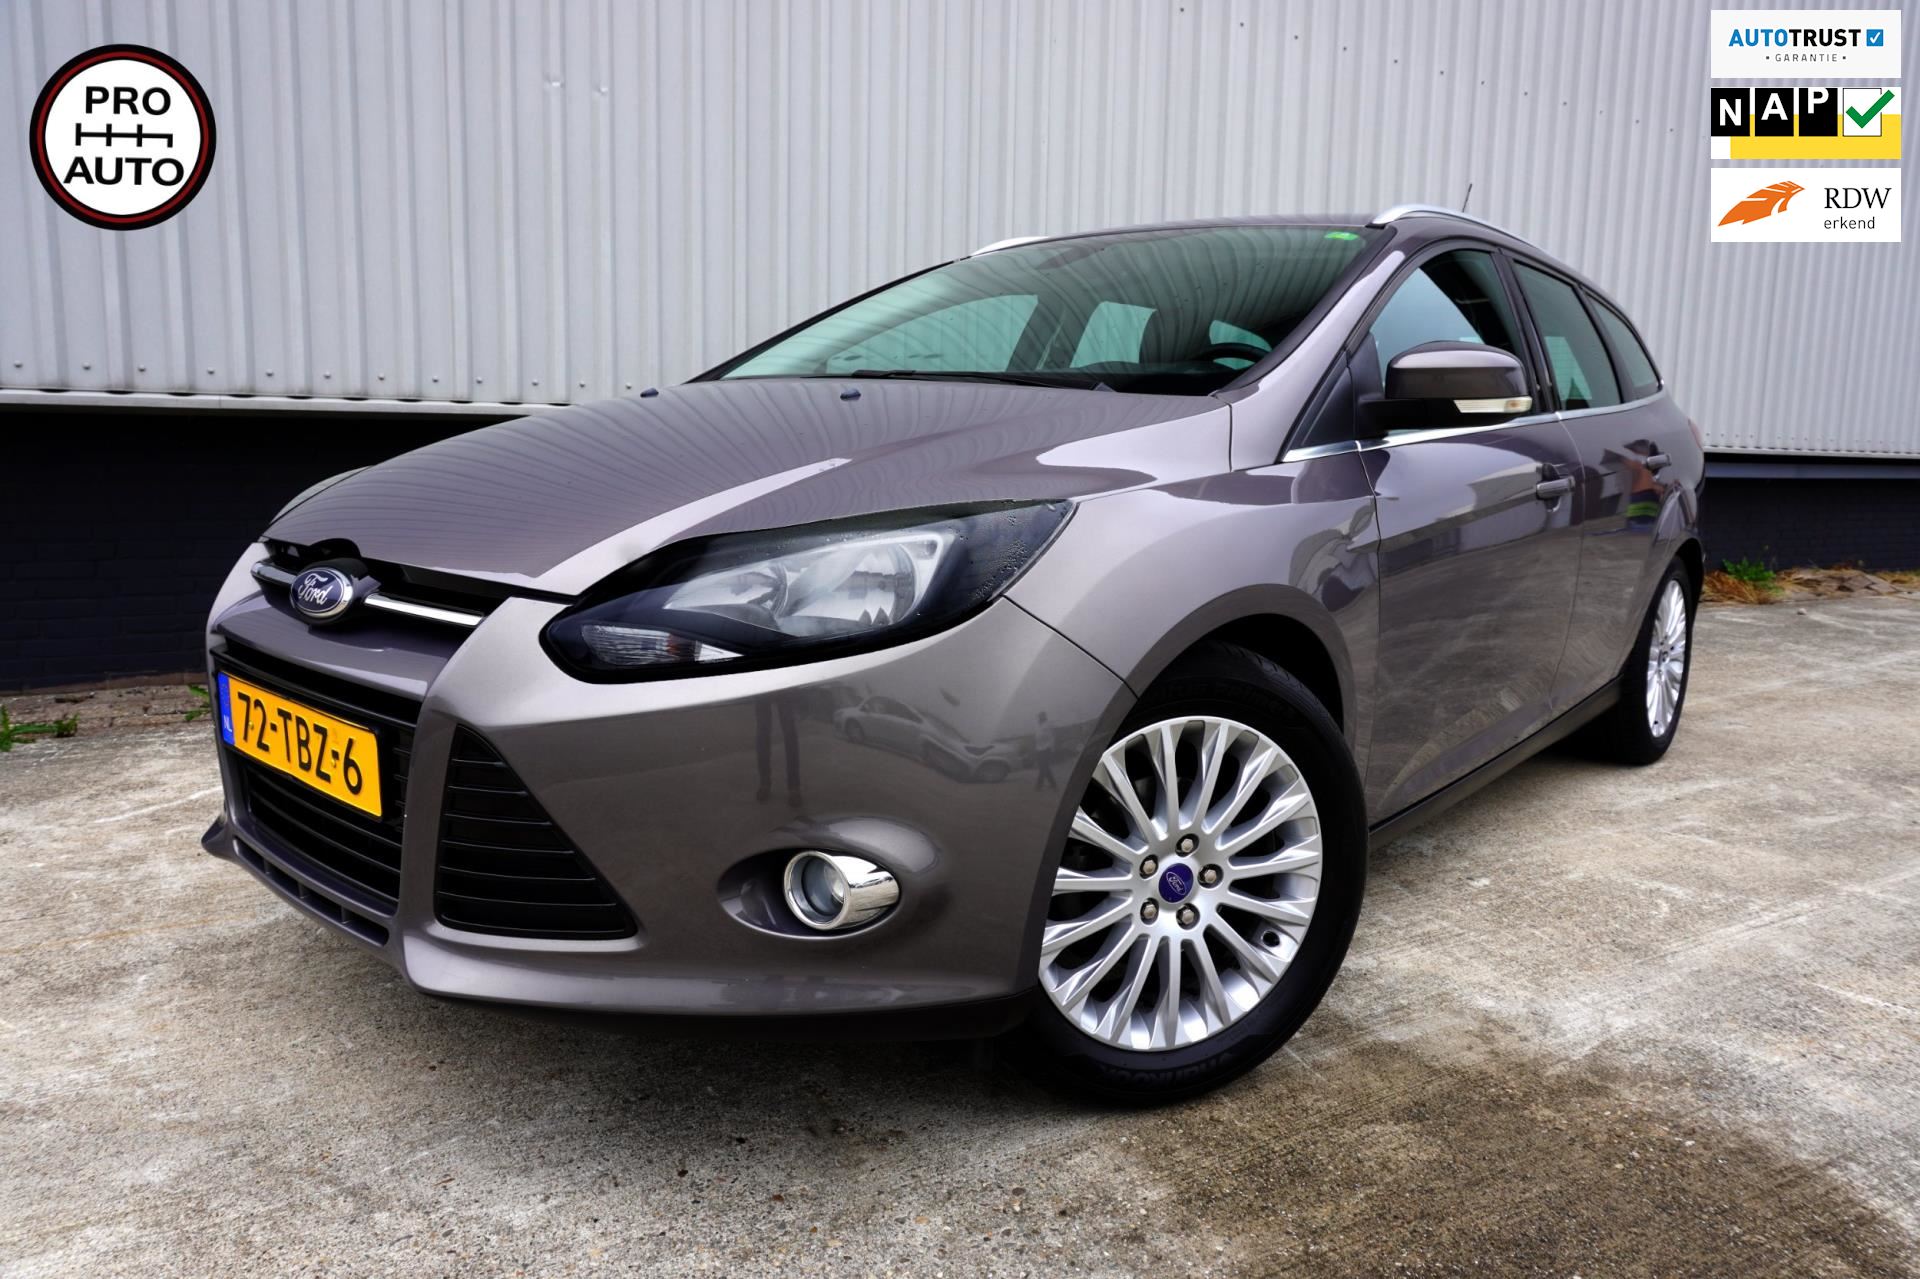 Ford Wagon - 1.6 TI- VCT First Edition Clima_ Cruise_ Trekh Benzine uit 2012 -